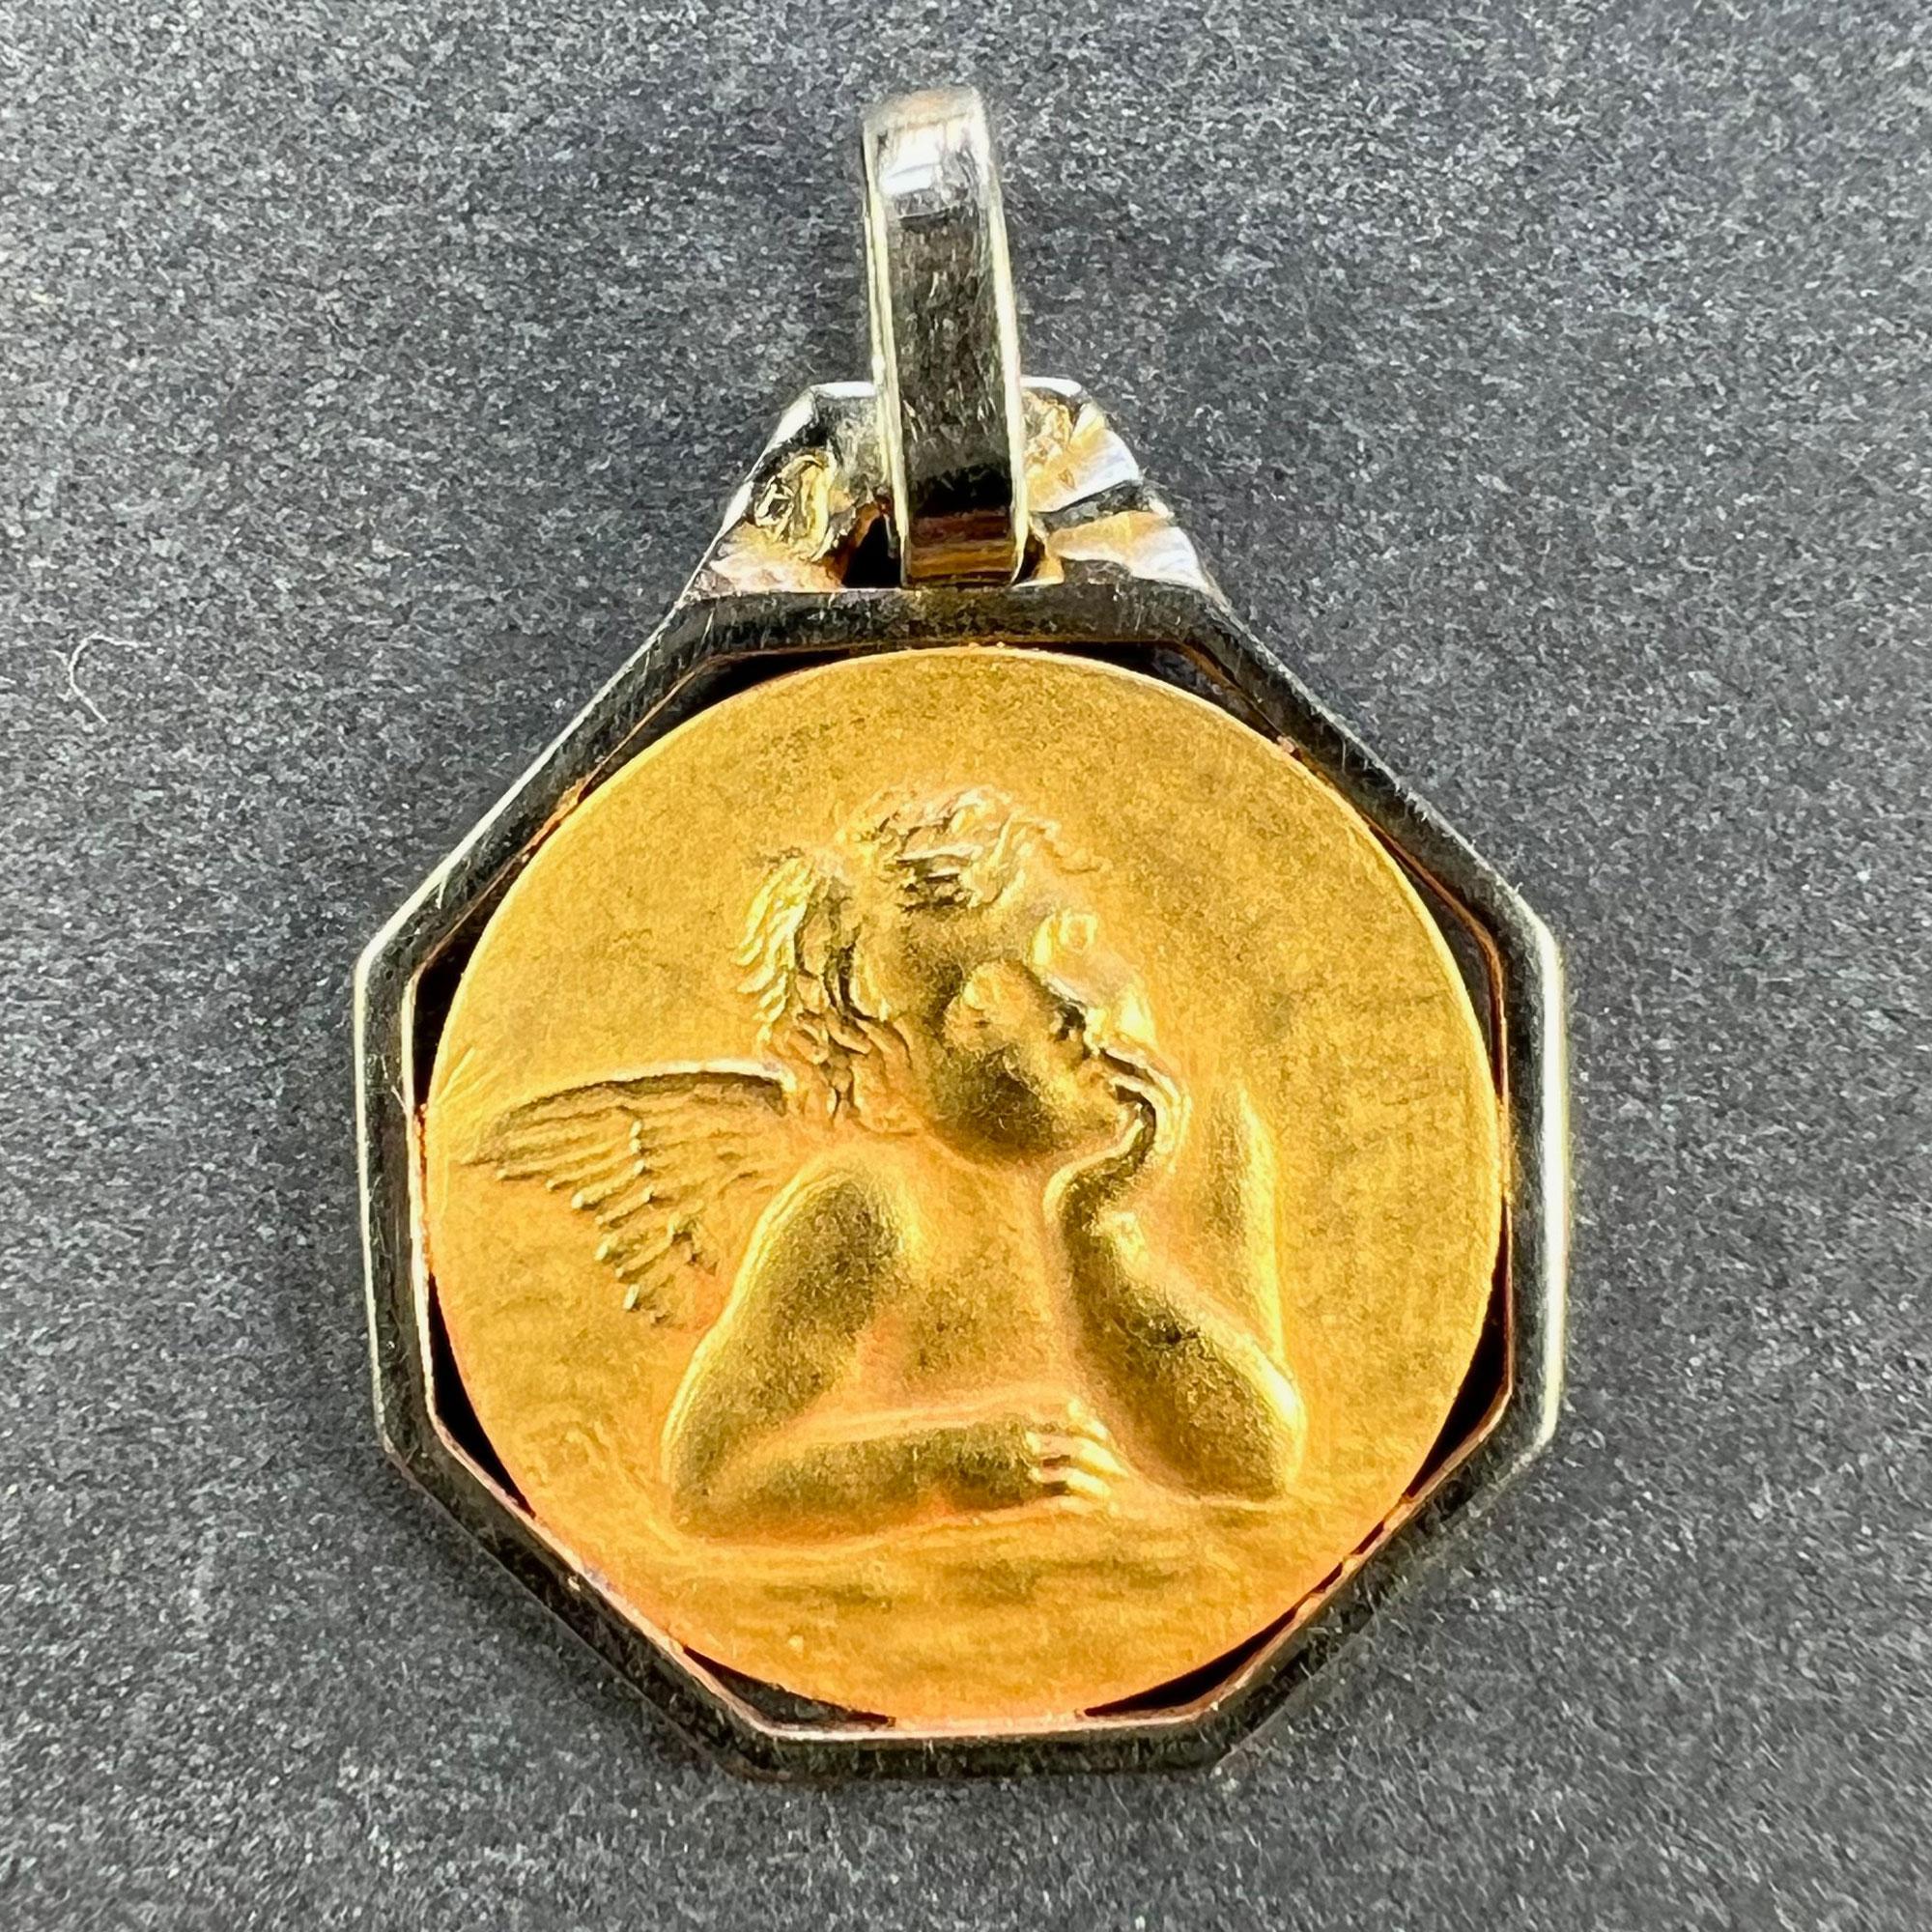 A French 18 karat (18K) yellow gold charm pendant designed as a circular medal depicting Raphael’s cherub within an octagonal white gold frame. The reverse shows a relief of wedding bells. Stamped with the eagle mark for 18 karat gold and French